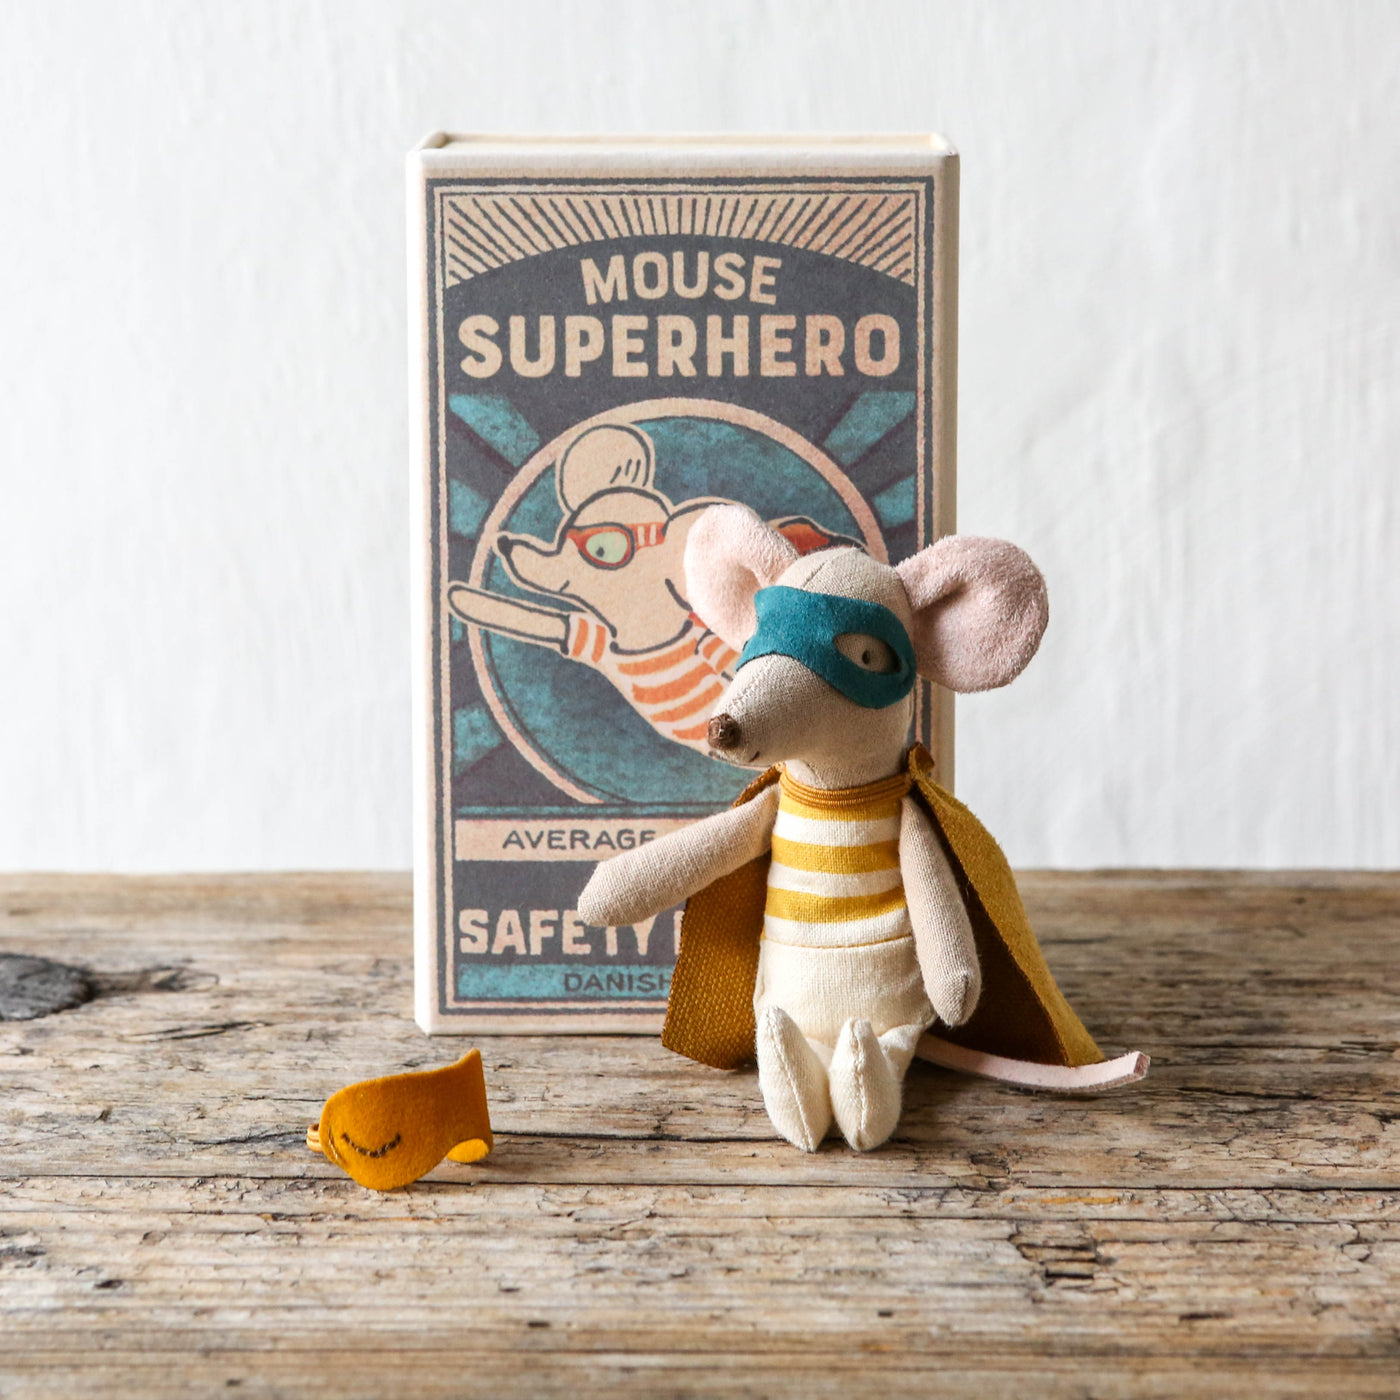 Super Hero Mouse Toy - Little Brother in Match Box